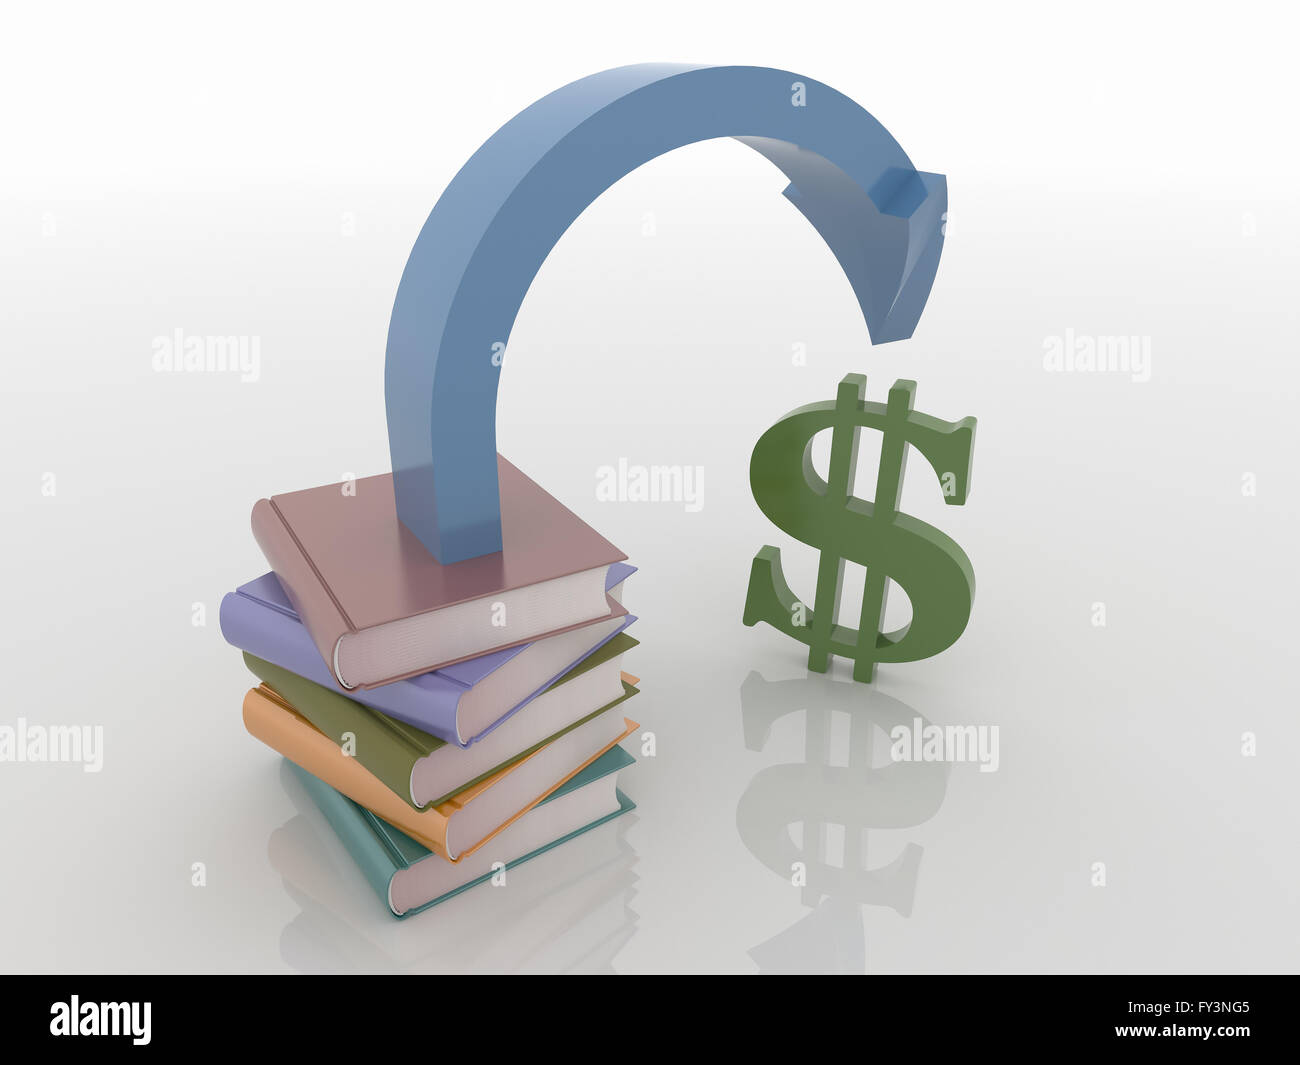 Abstract 3D design of a stack of books with an arrow pointing to money. Stock Photo